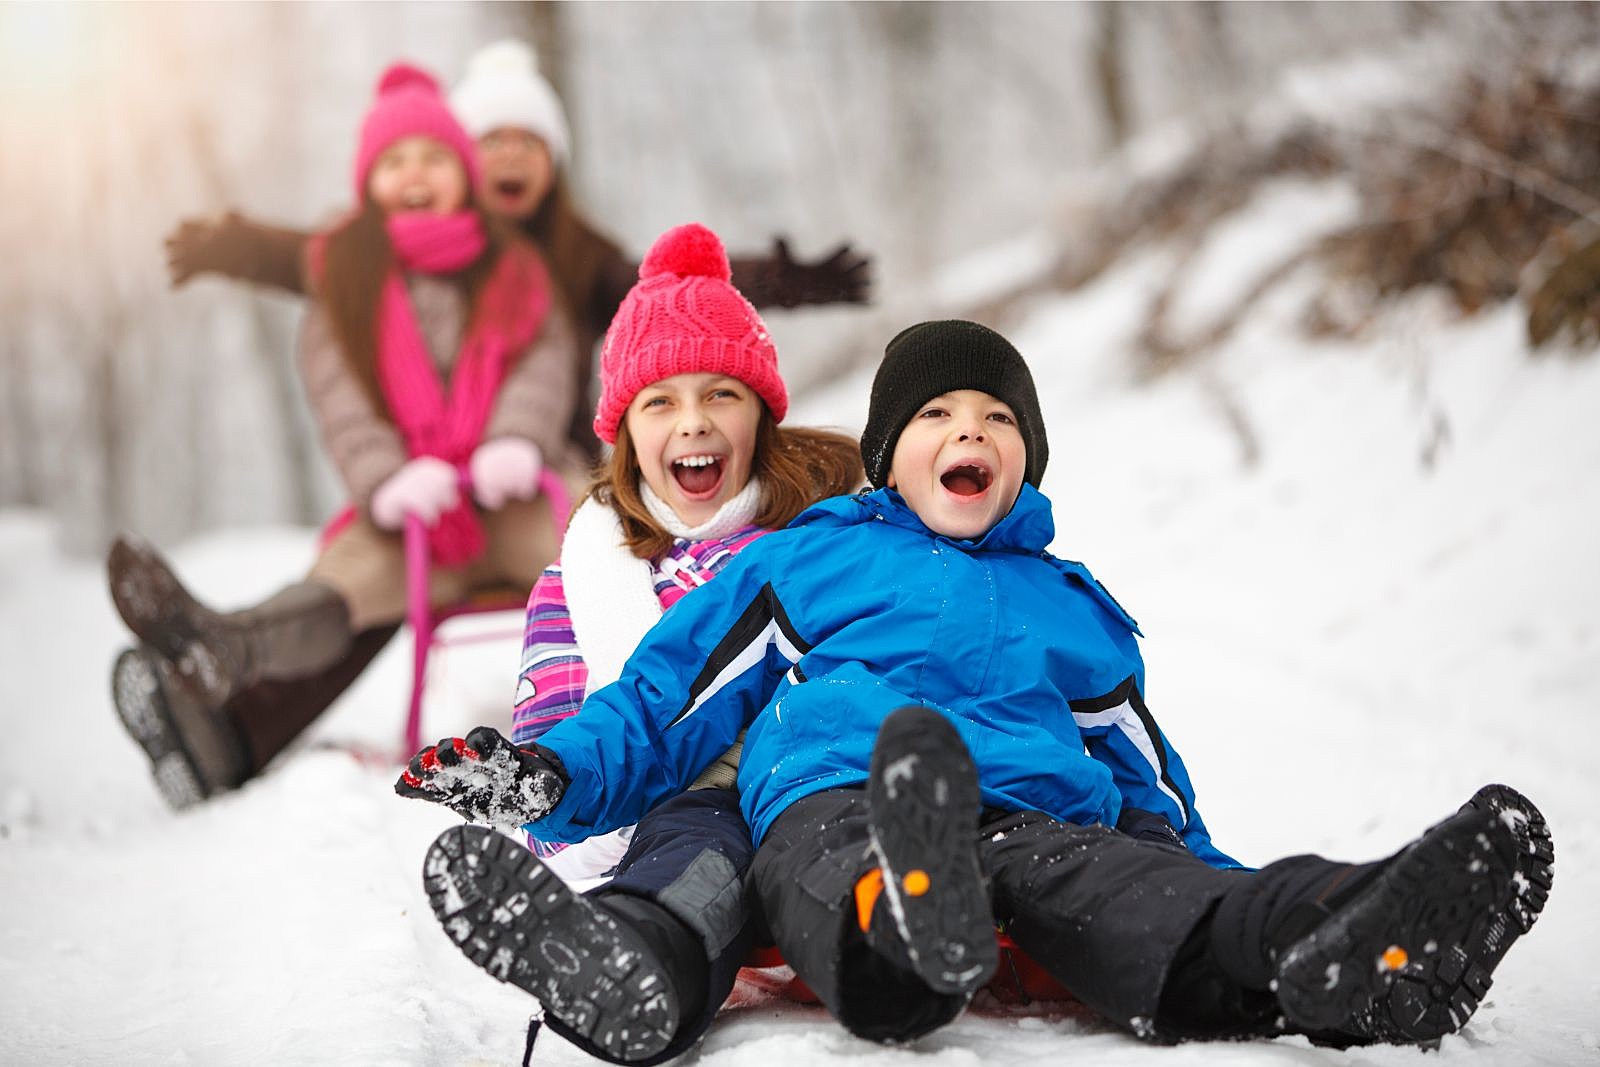 5 Things To Do With The Kids During Winter Break In Western New York